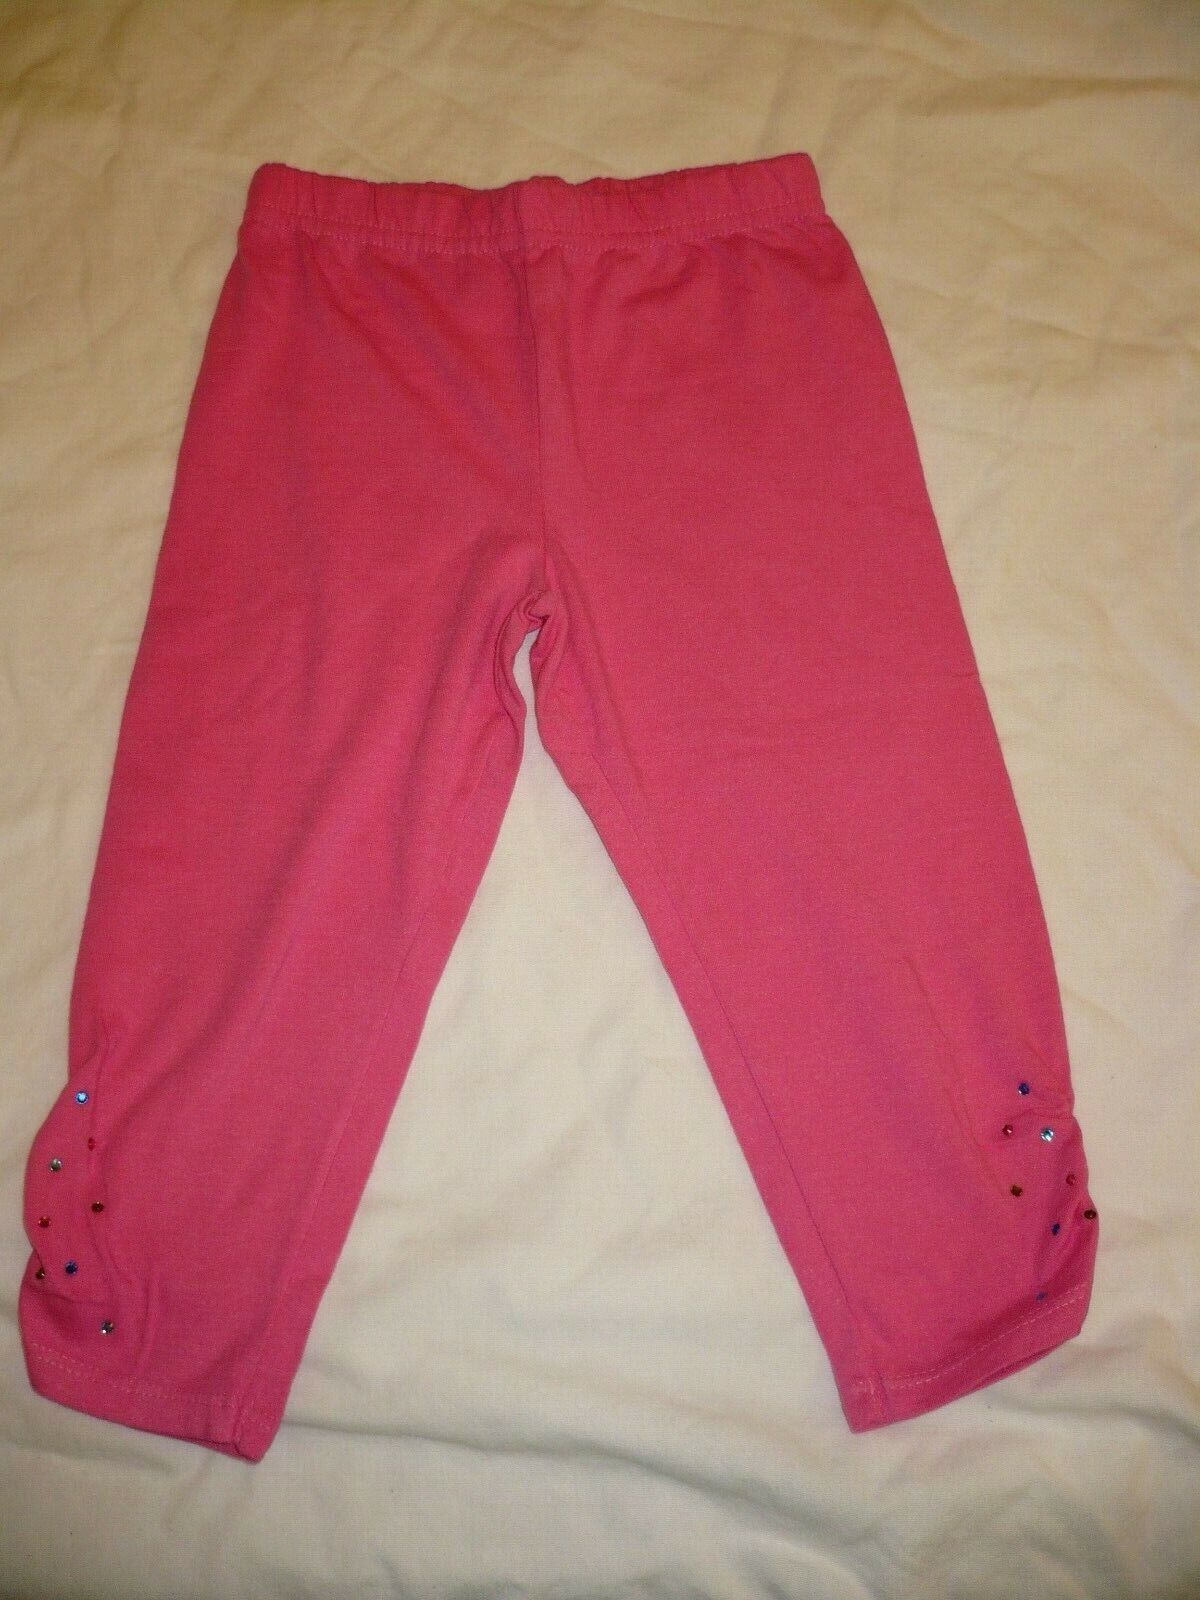 Primary image for 365 Kids Girls Solid Cinch Capri Pants W Rhinestones Size 6 Pink  New